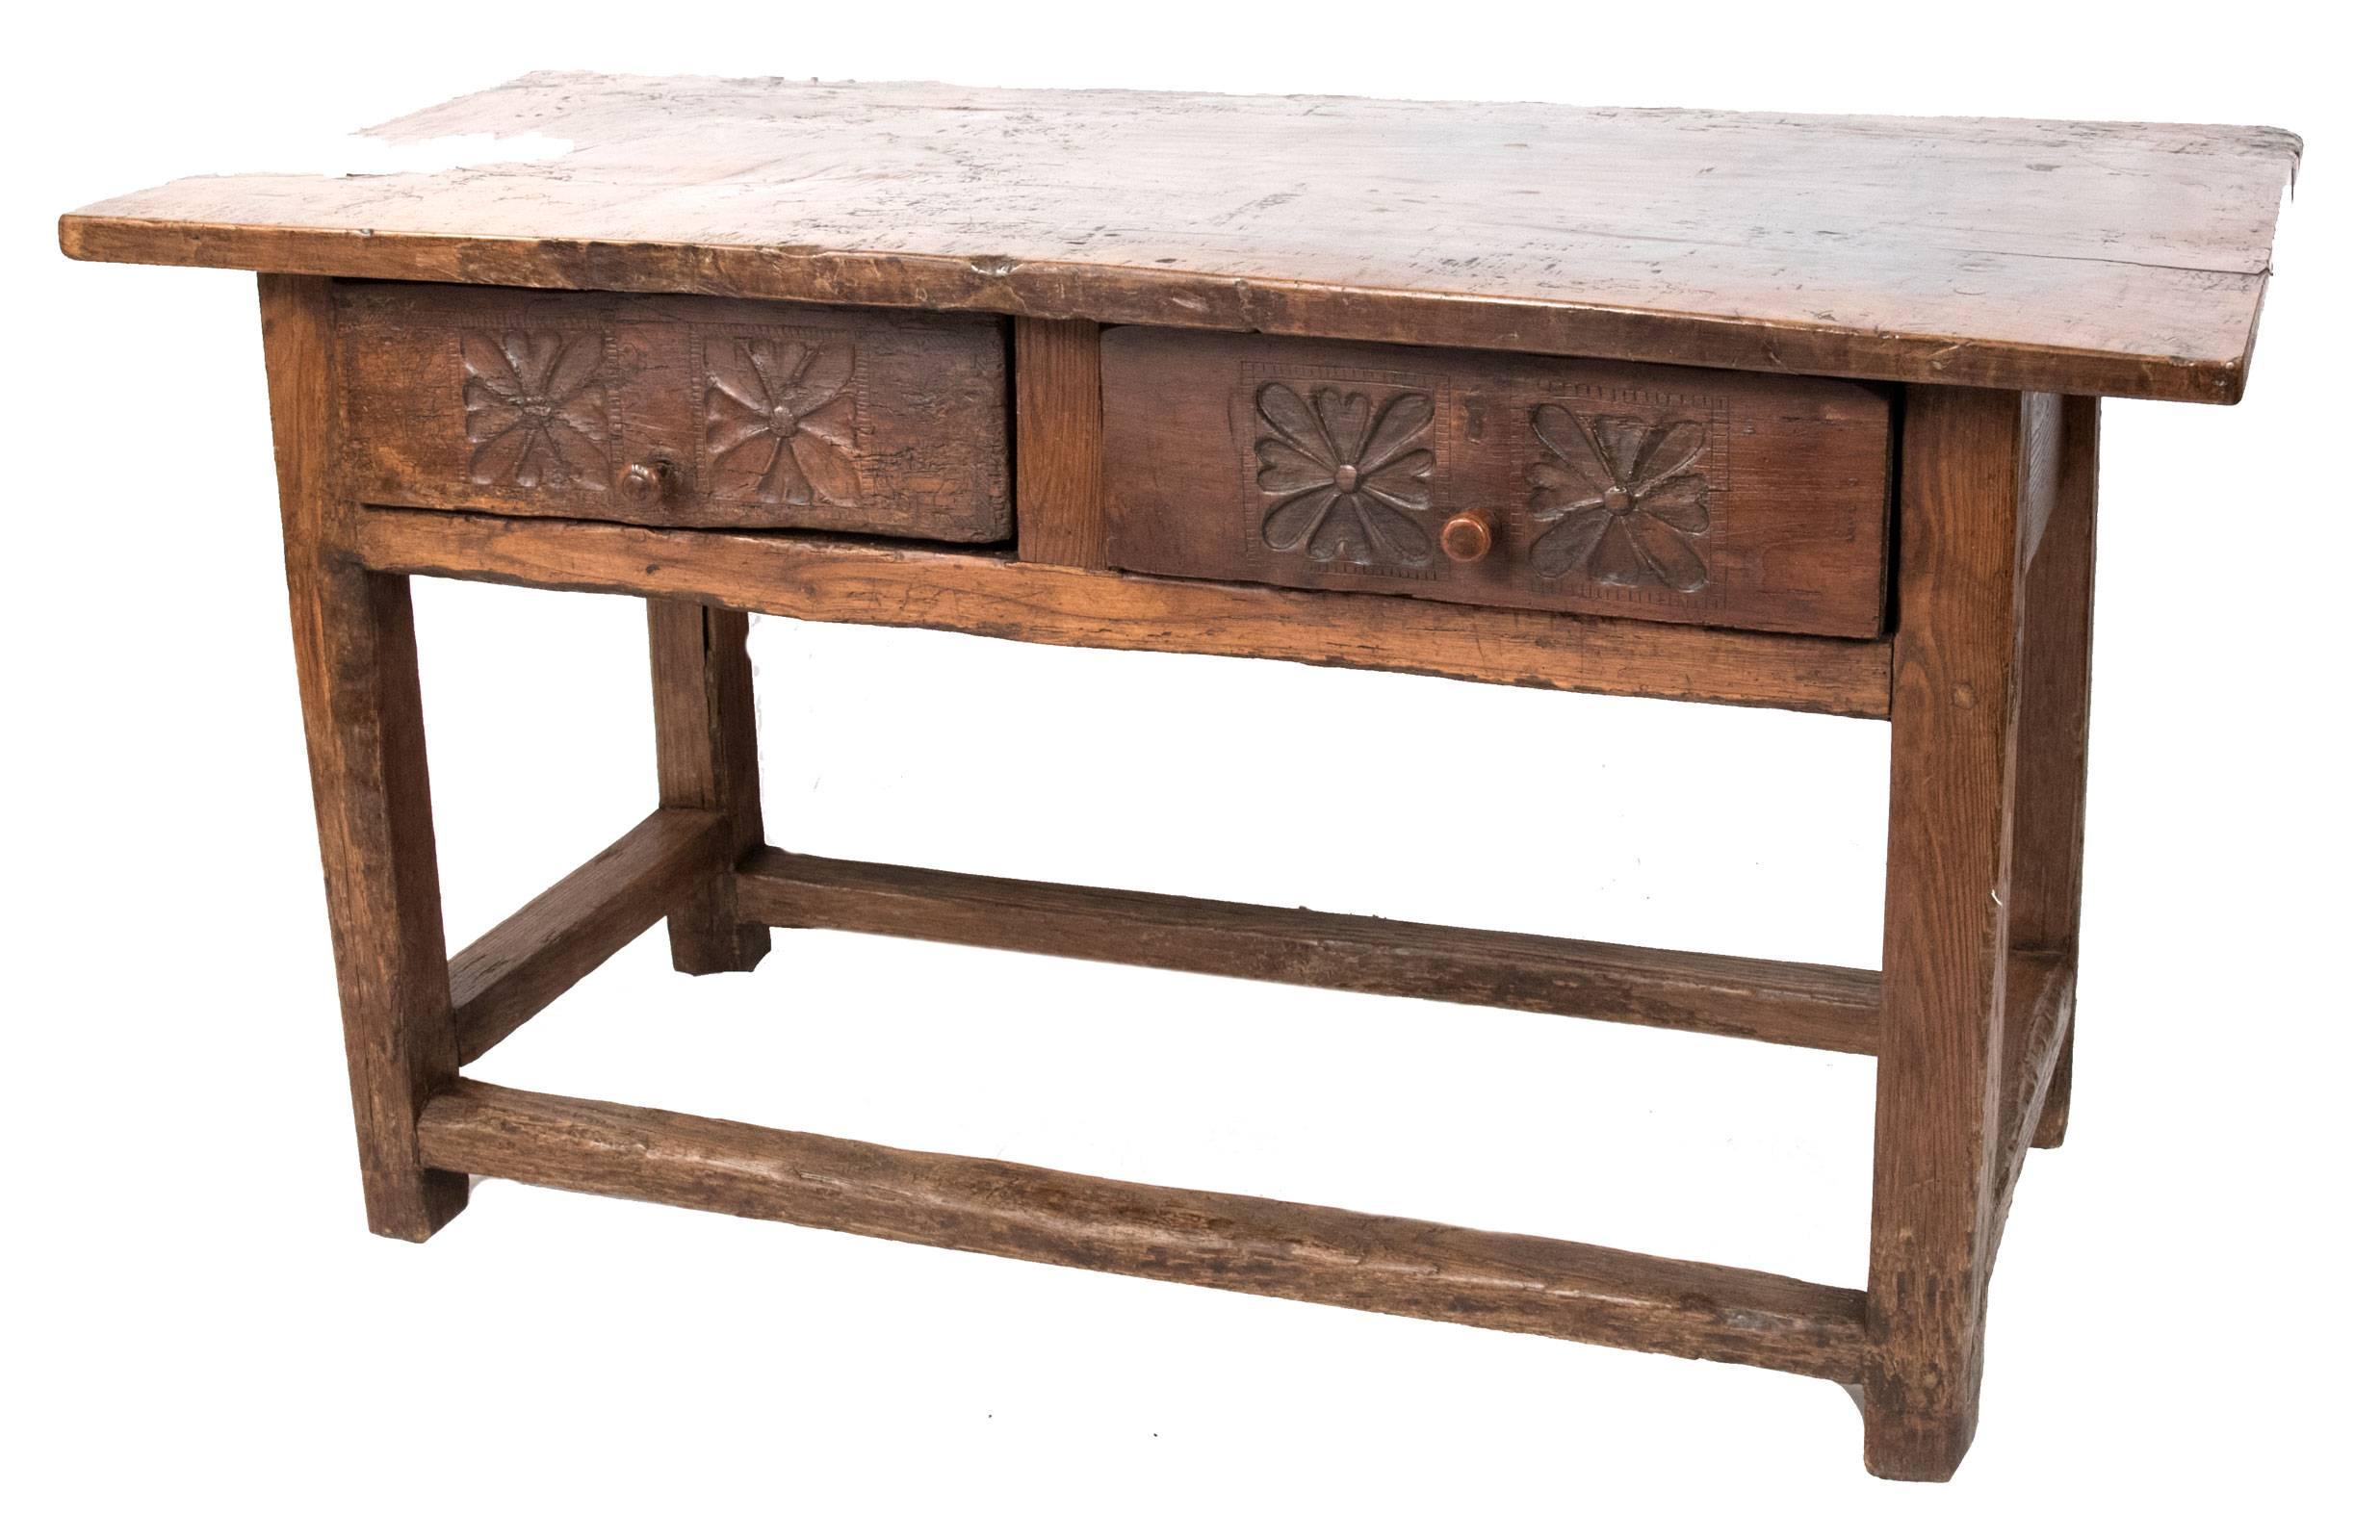 A 19th century walnut console table with a slab top above a frieze with two drawers. One drawer looks original, the front decorated with carved floral motifs and incised with additional decoration and a single pull, while the second is decorated